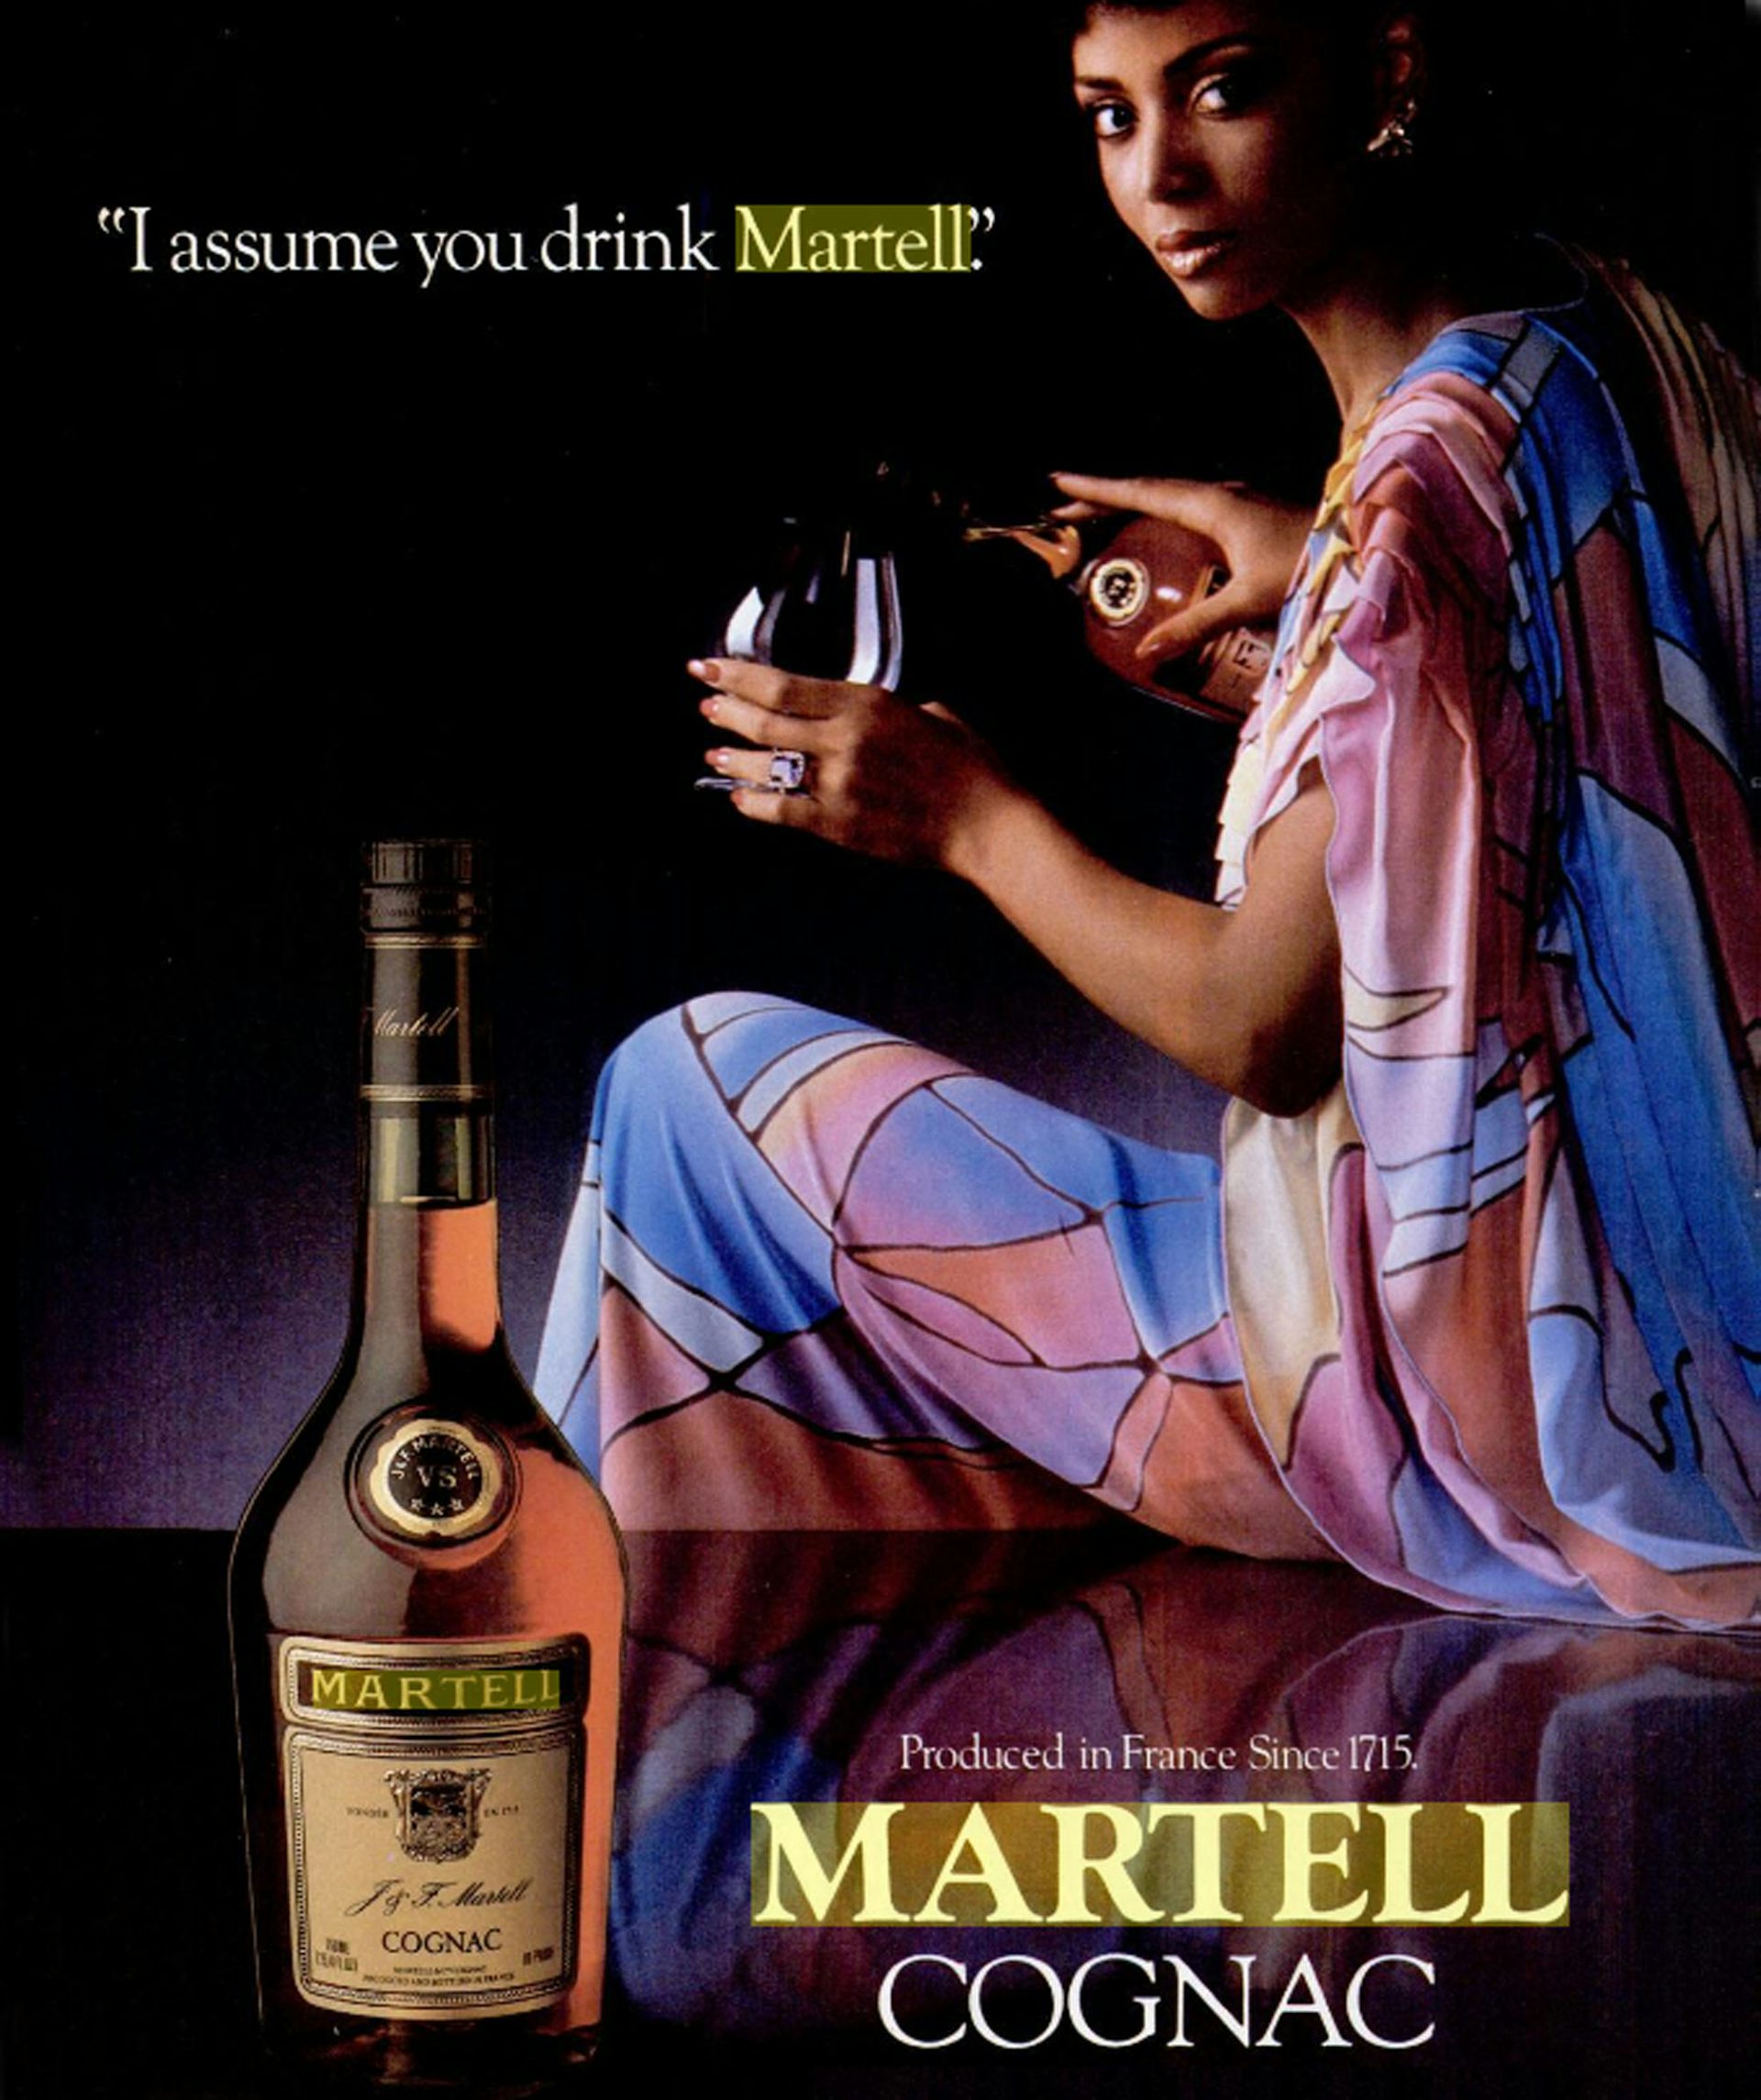 Martell cognac ad in the December 1983 issue of Ebony magazine.